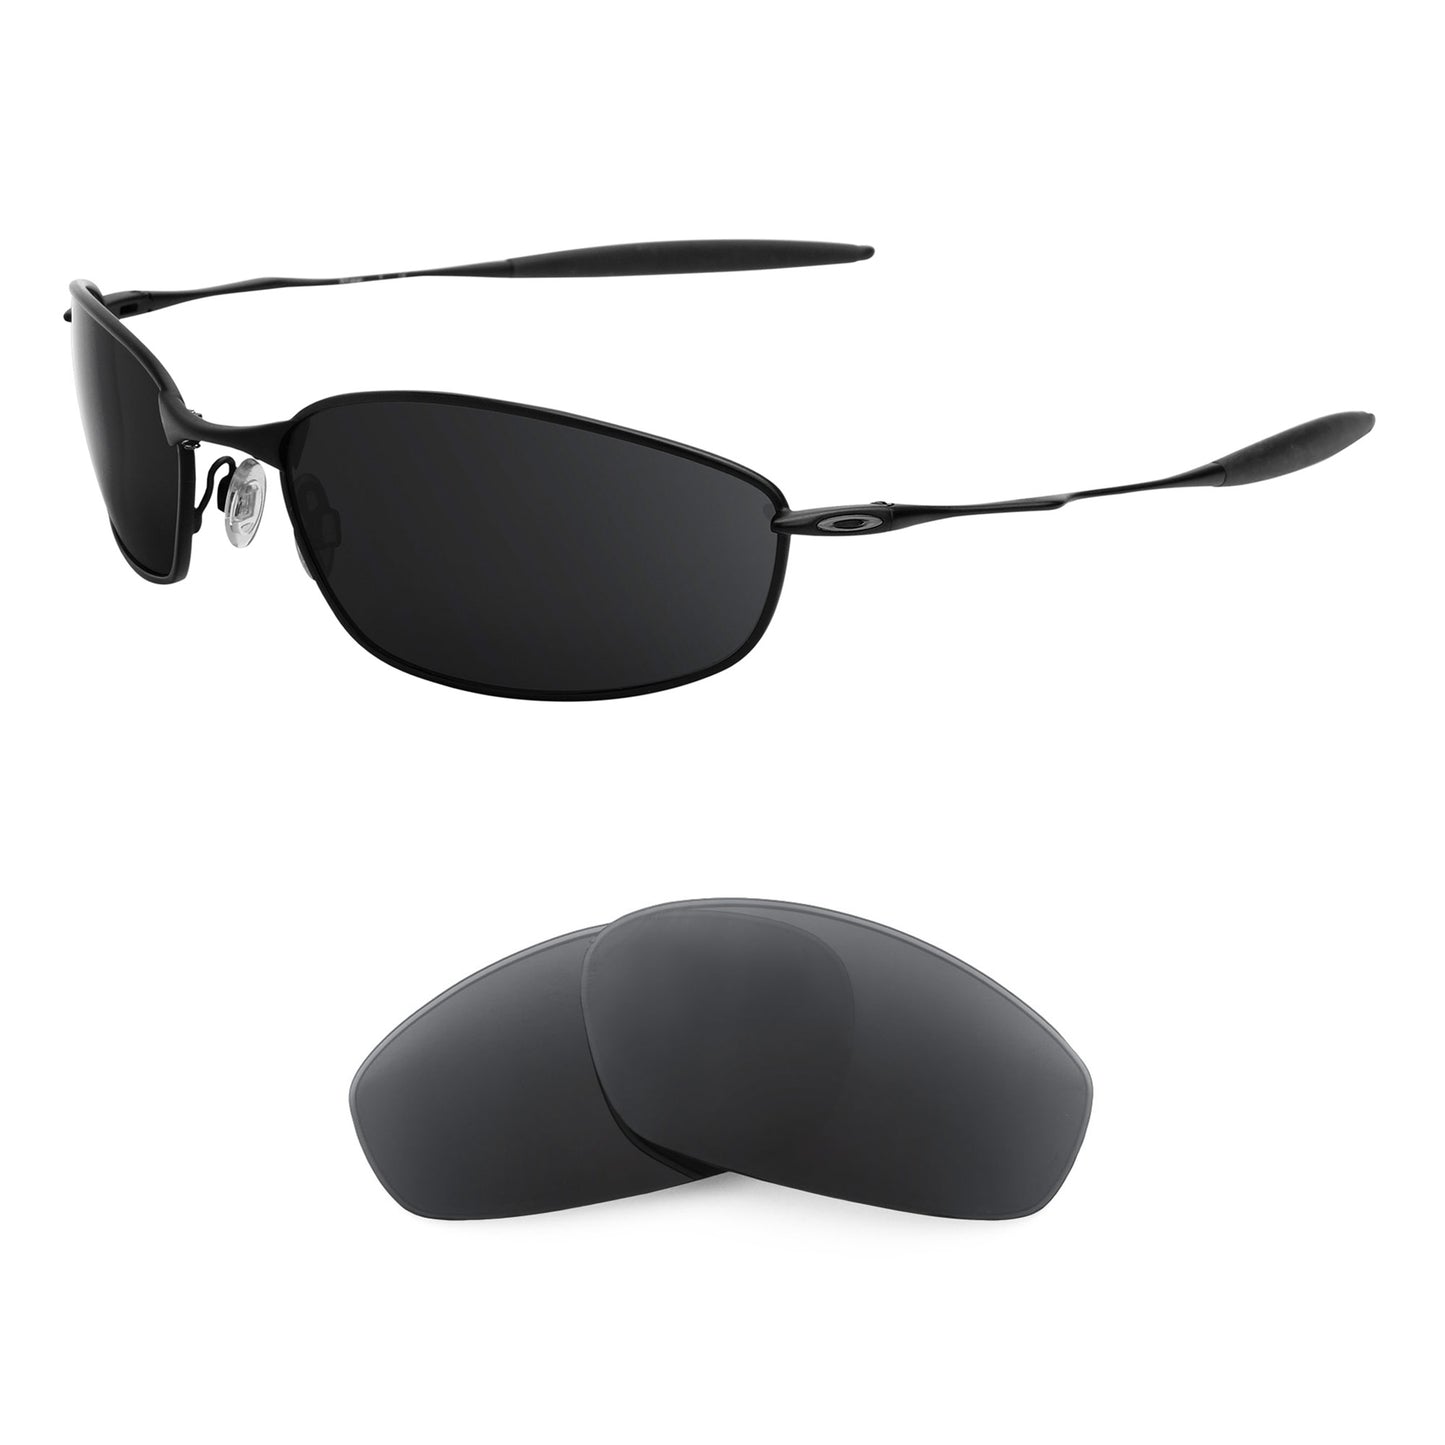 Oakley Whisker sunglasses with replacement lenses